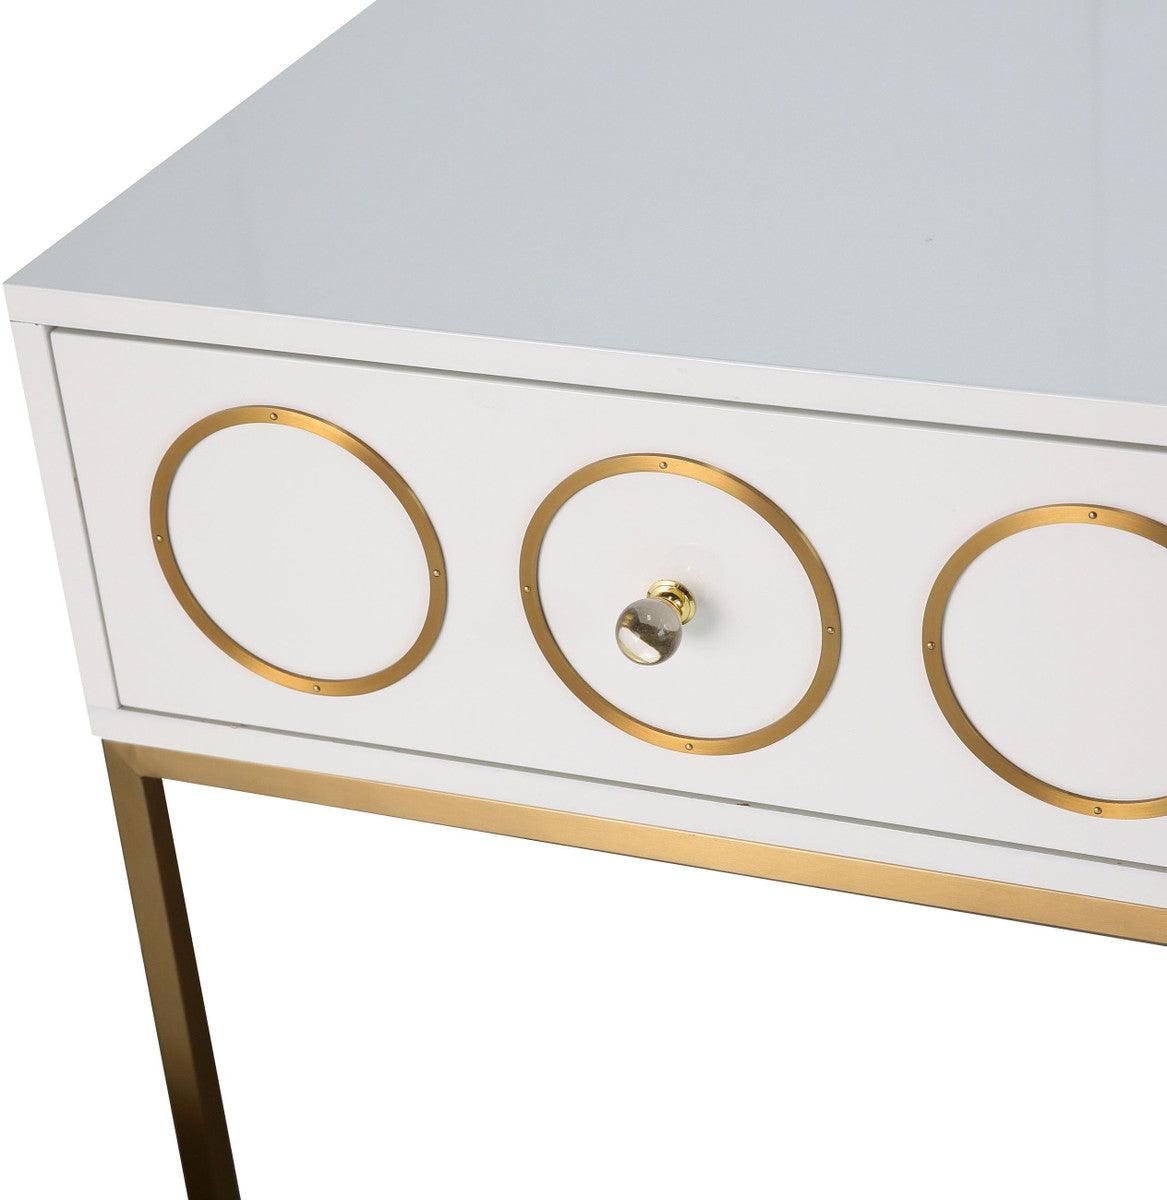 Elly Side Table - Euro Living Furniture